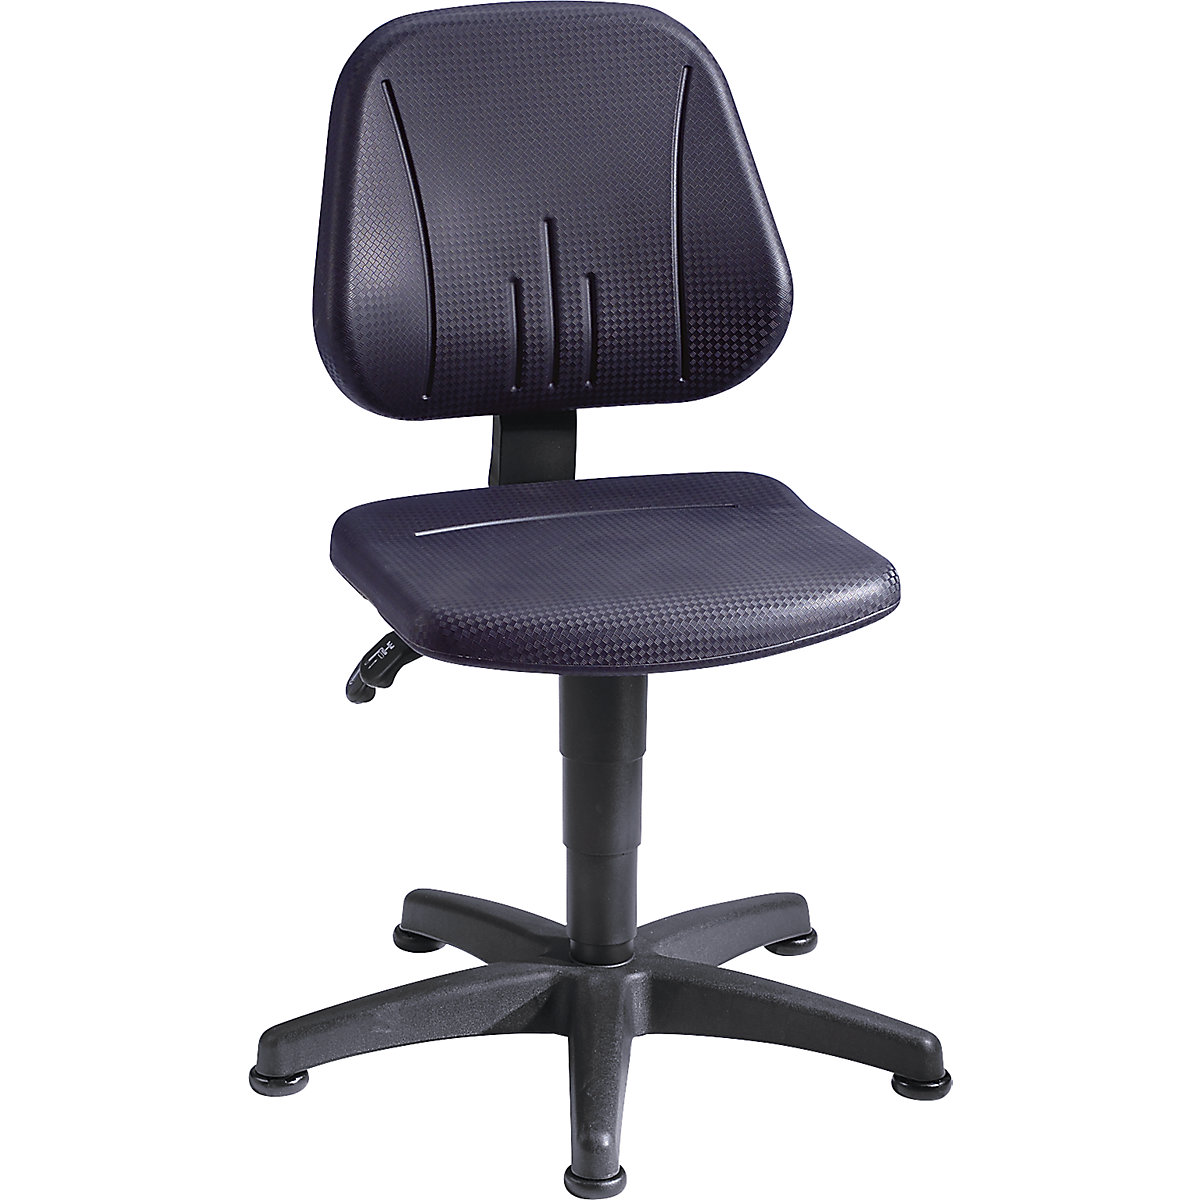 Industrial swivel chair – bimos, with gas lift height adjustment, PU foam, black, with floor glides-14